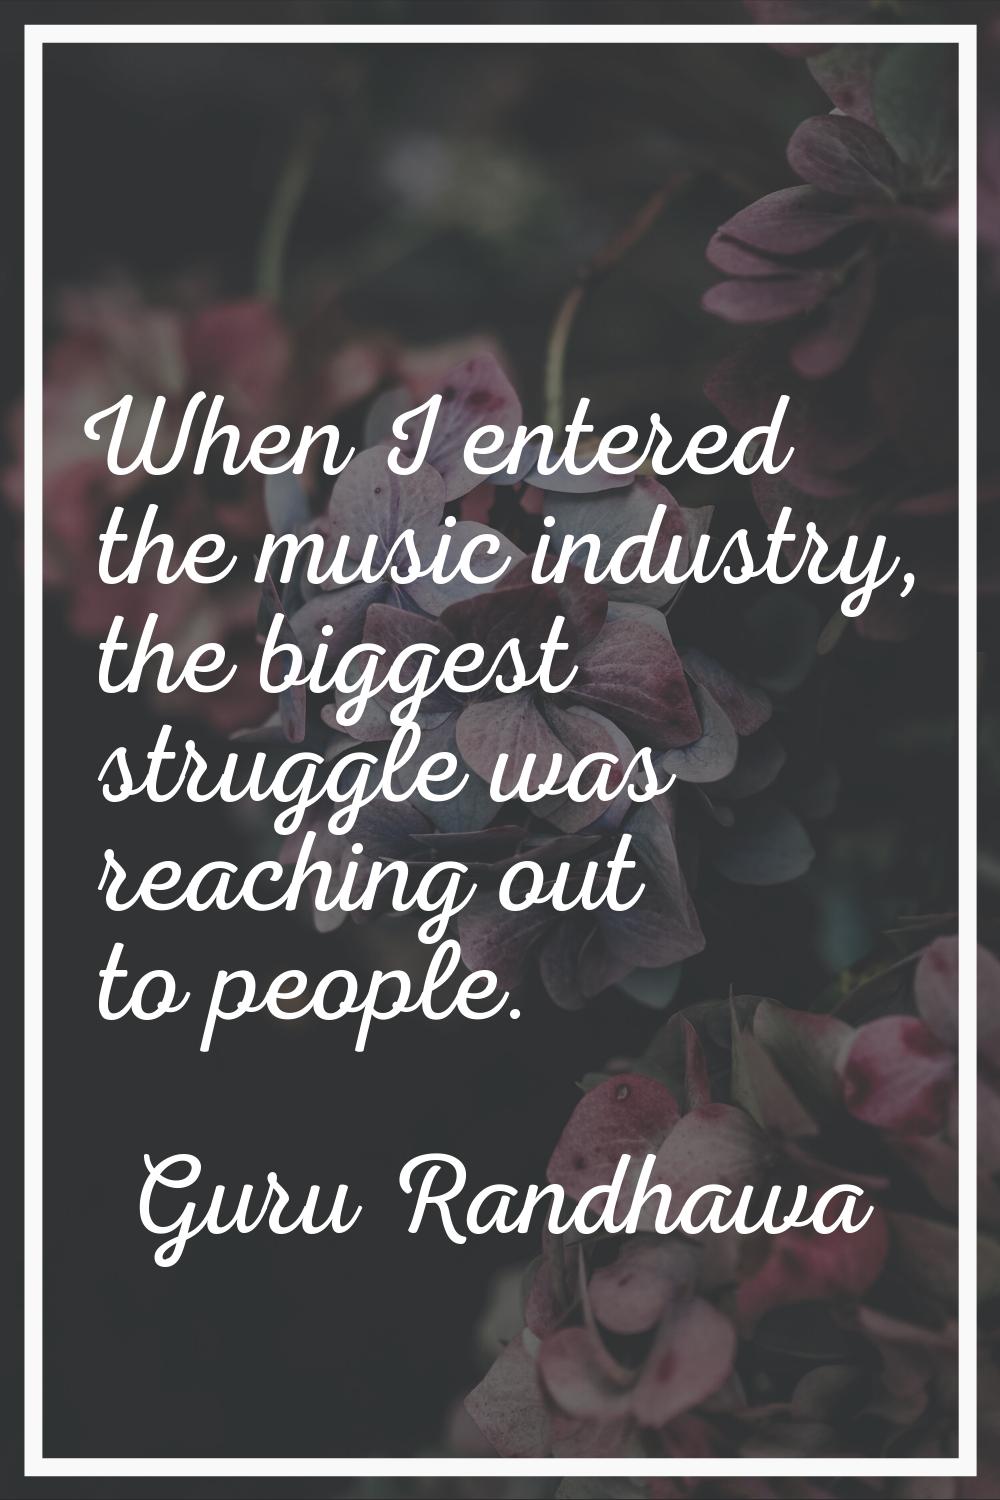 When I entered the music industry, the biggest struggle was reaching out to people.